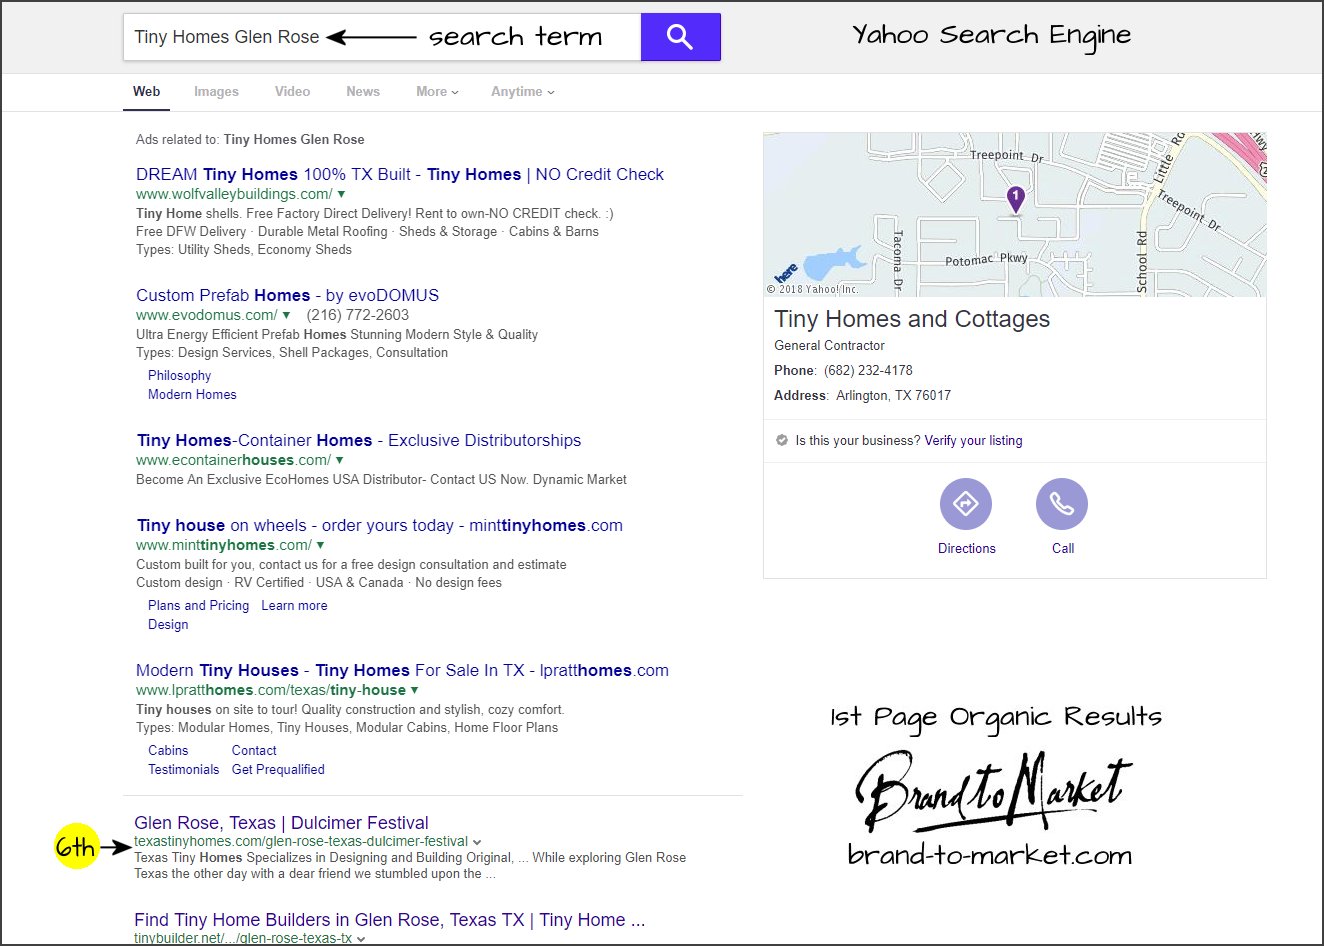 First Page Search Results, Ist Page Search Results, How to achieve 1st page search results, Branding For Search Results, Search Engine Results